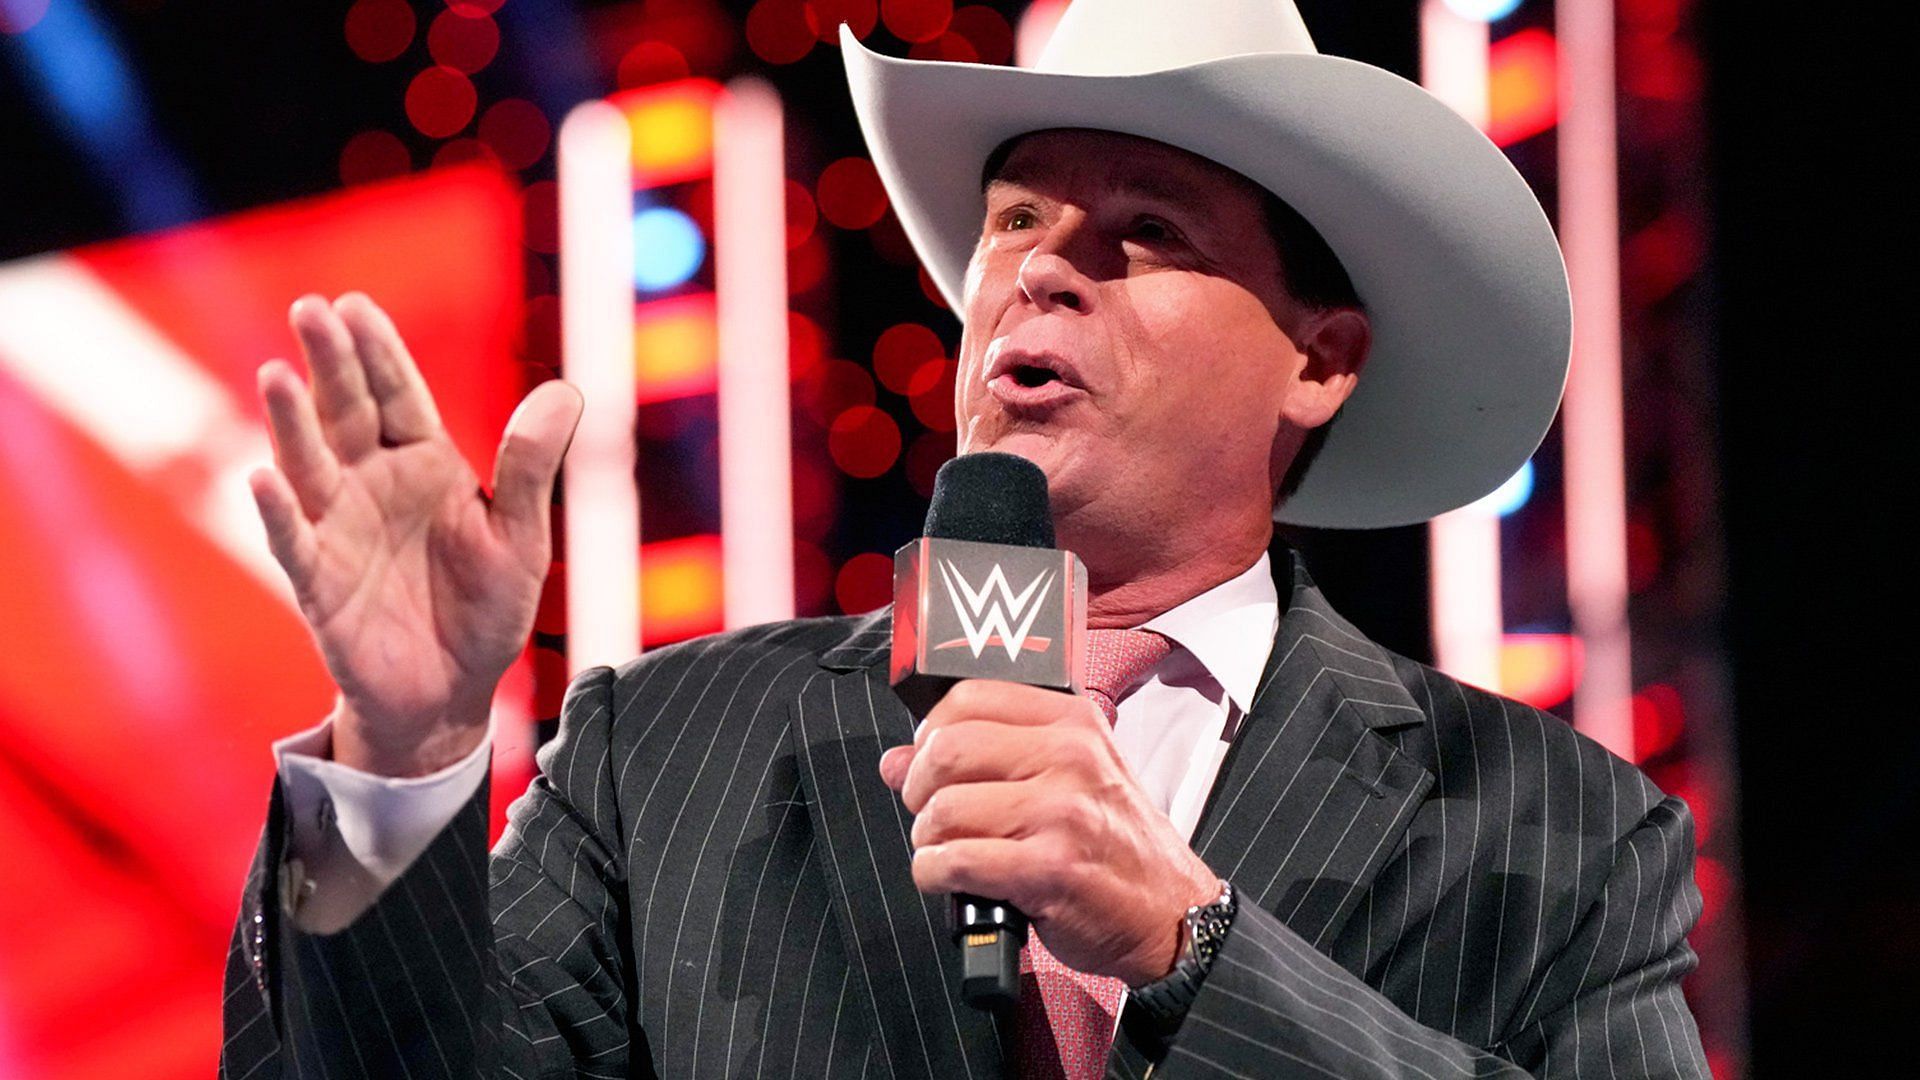 WWE Hall of Famer JBL speaks to fans on a live RAW